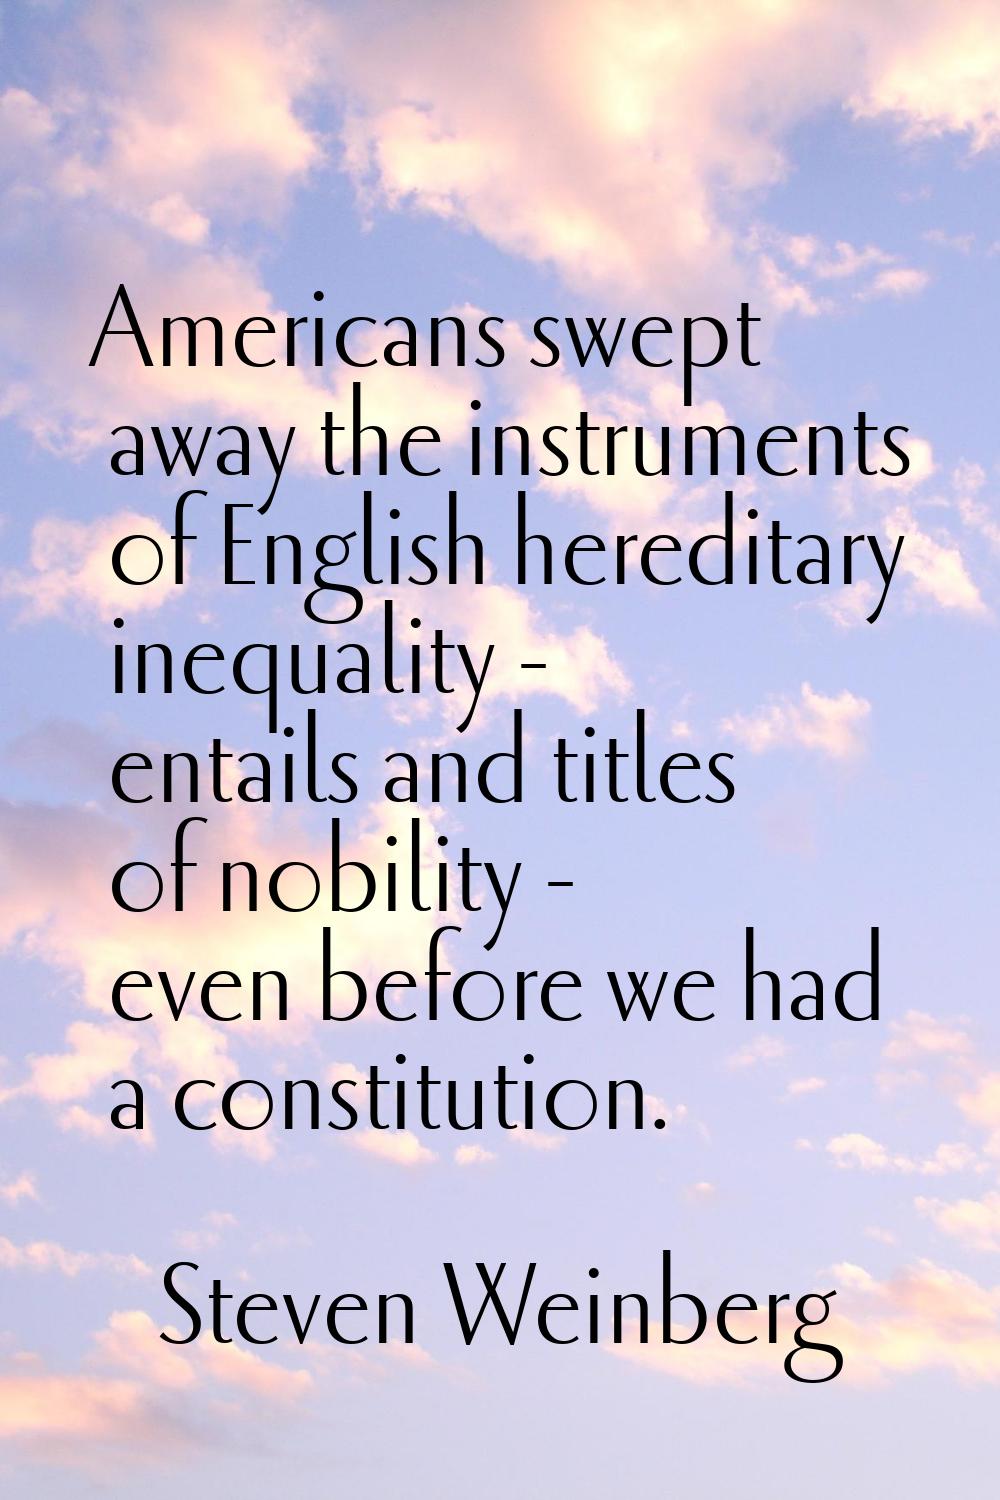 Americans swept away the instruments of English hereditary inequality - entails and titles of nobil